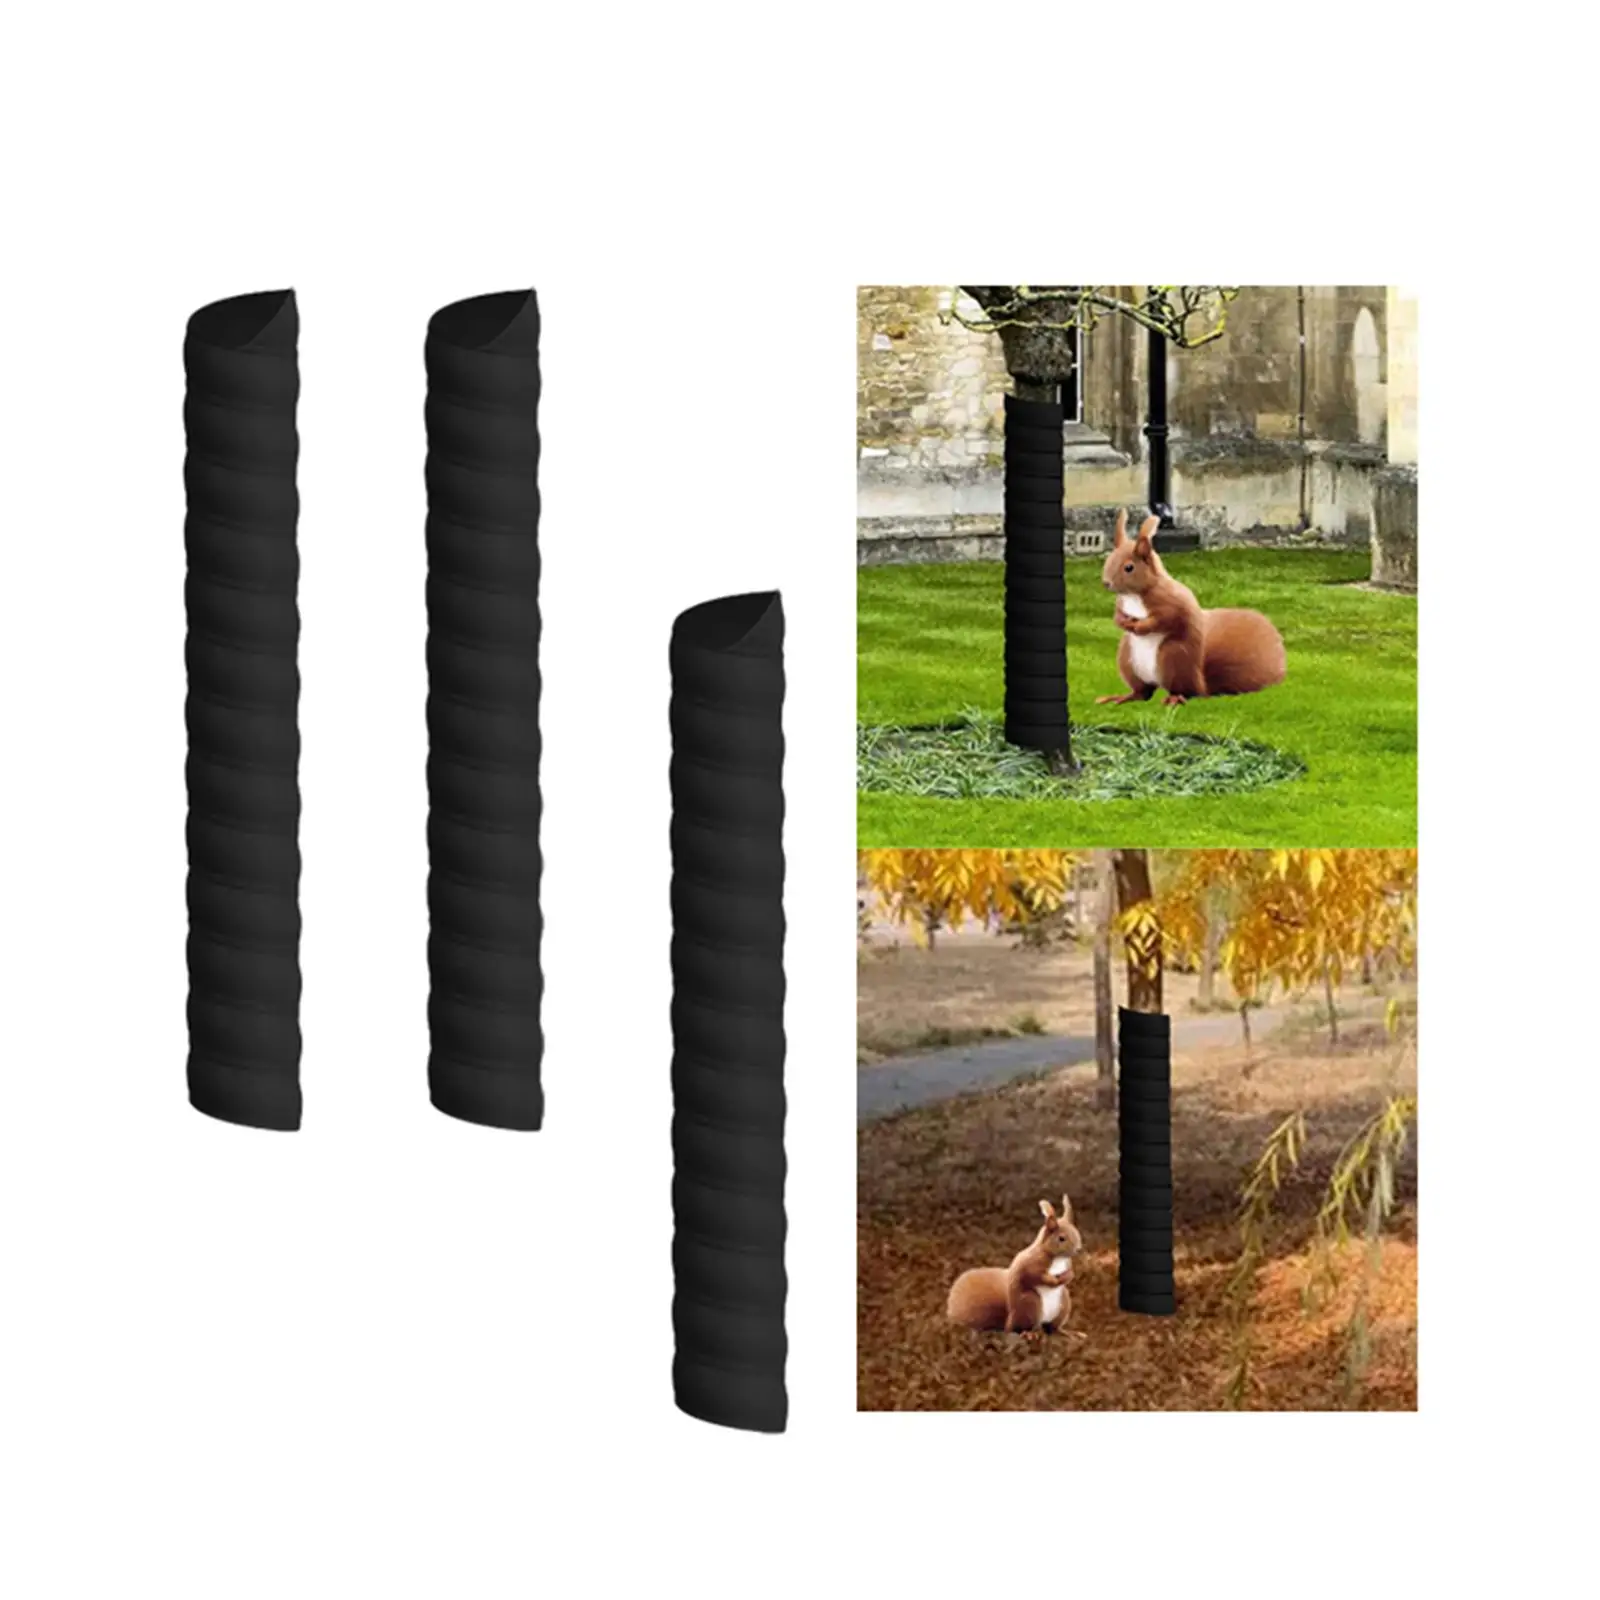 2x Black Tree Trunk Protectors Sapling Protector Durable Scratch Resistant Plants Guard Protective Weather Resistant Tree Wraps